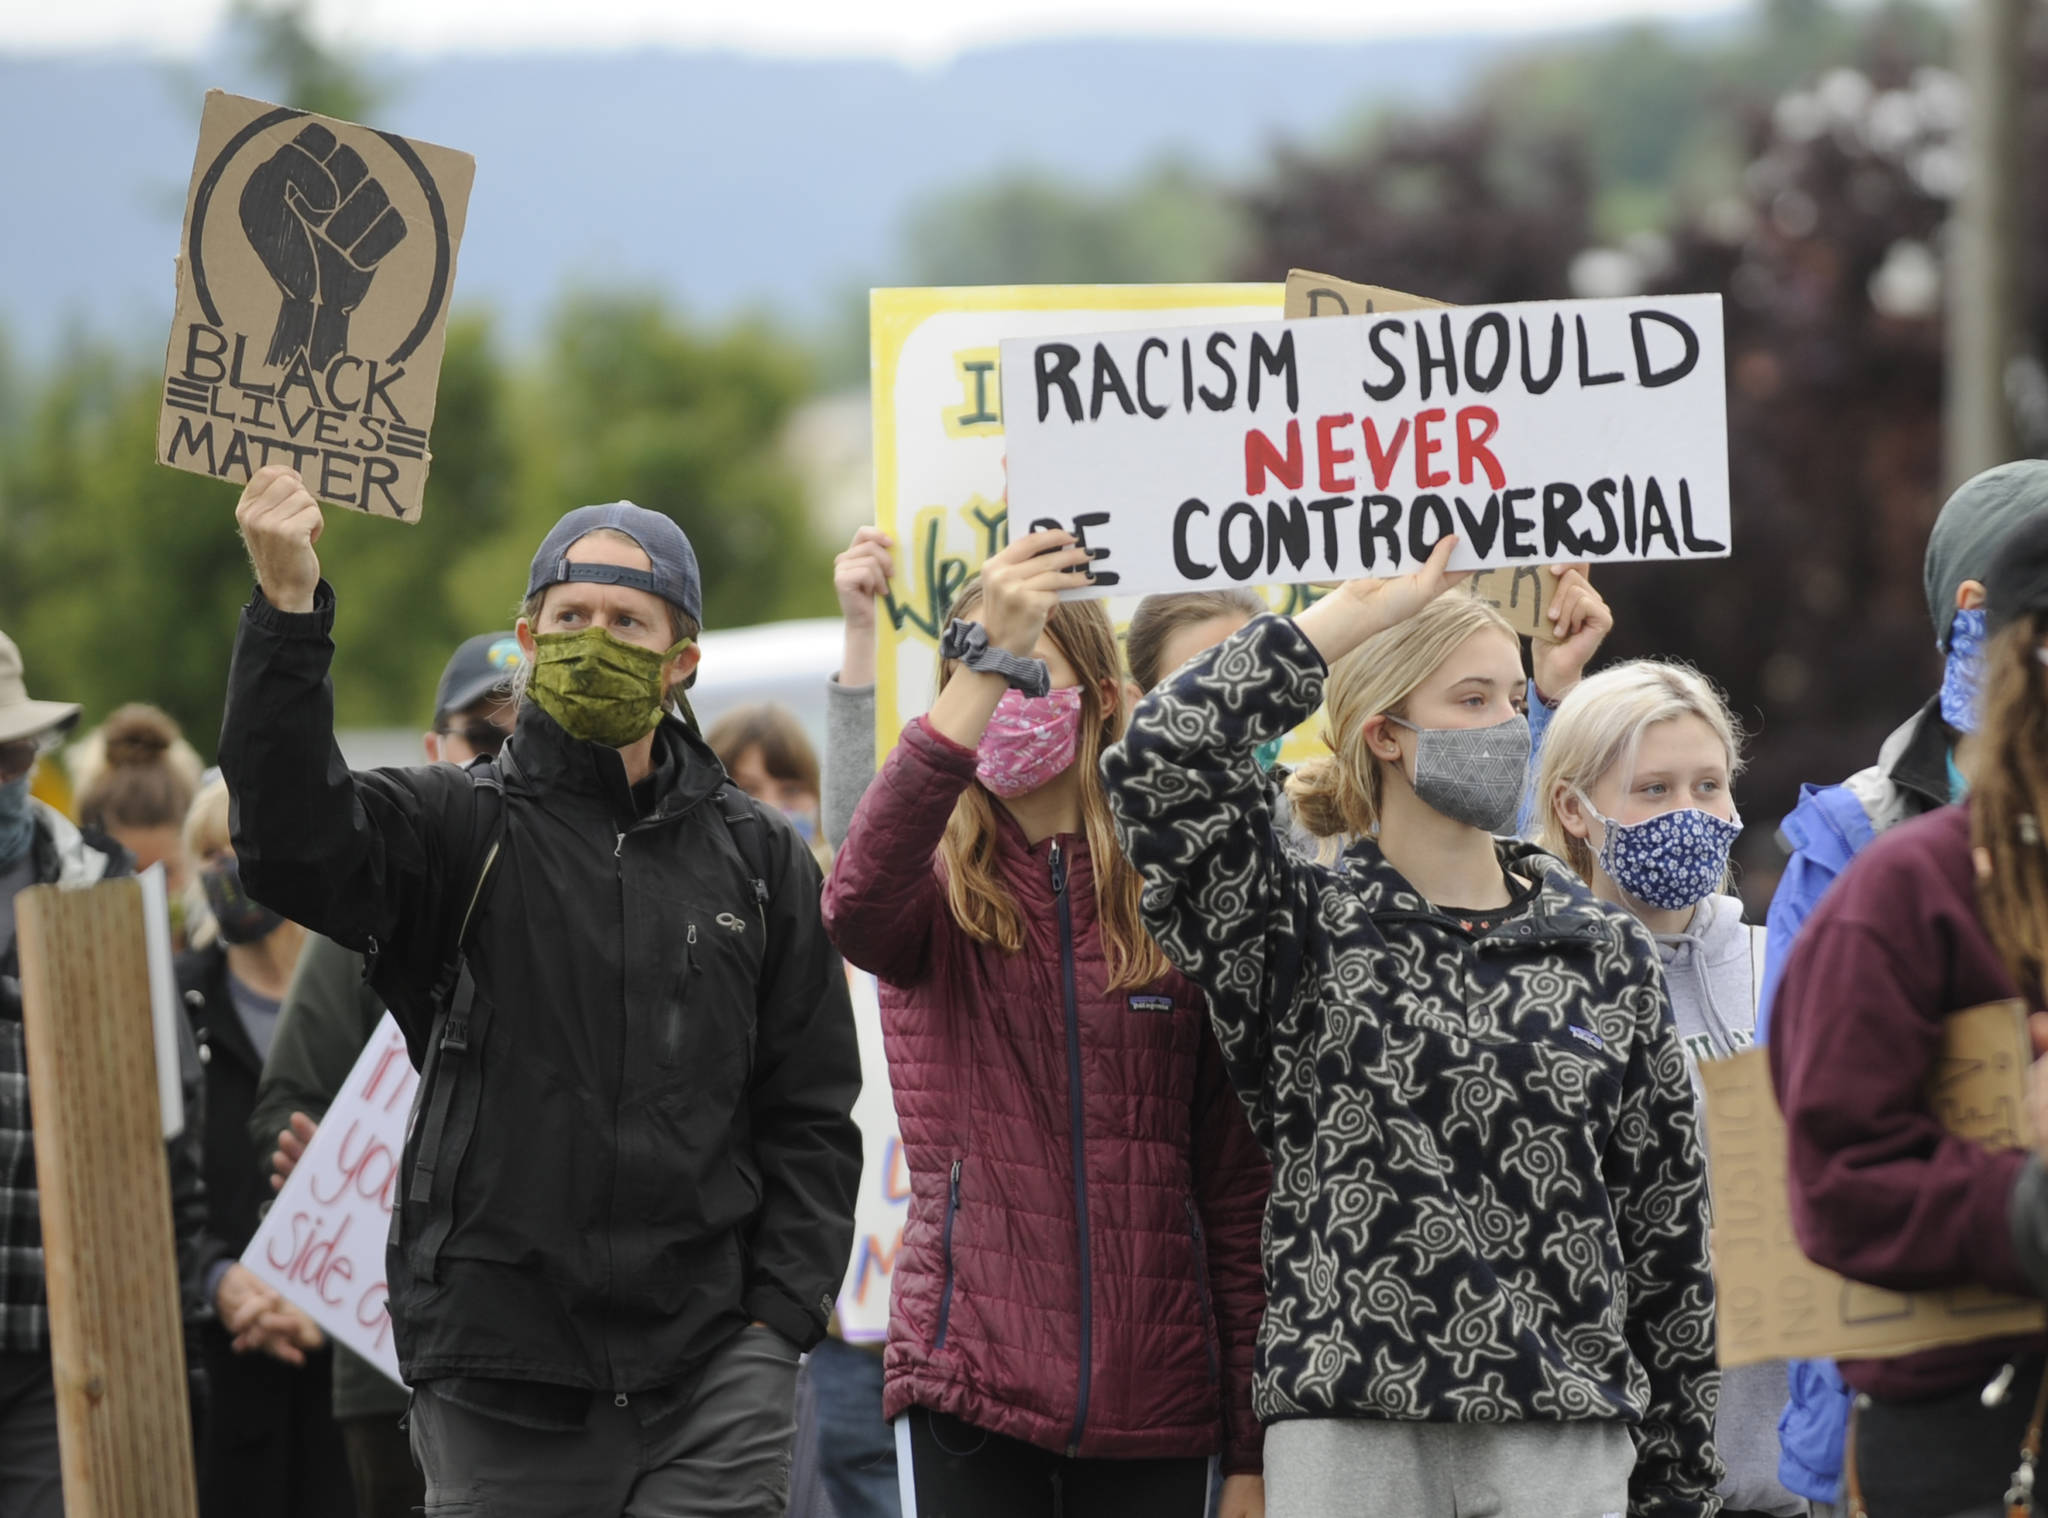 March keeps community focus on race equality